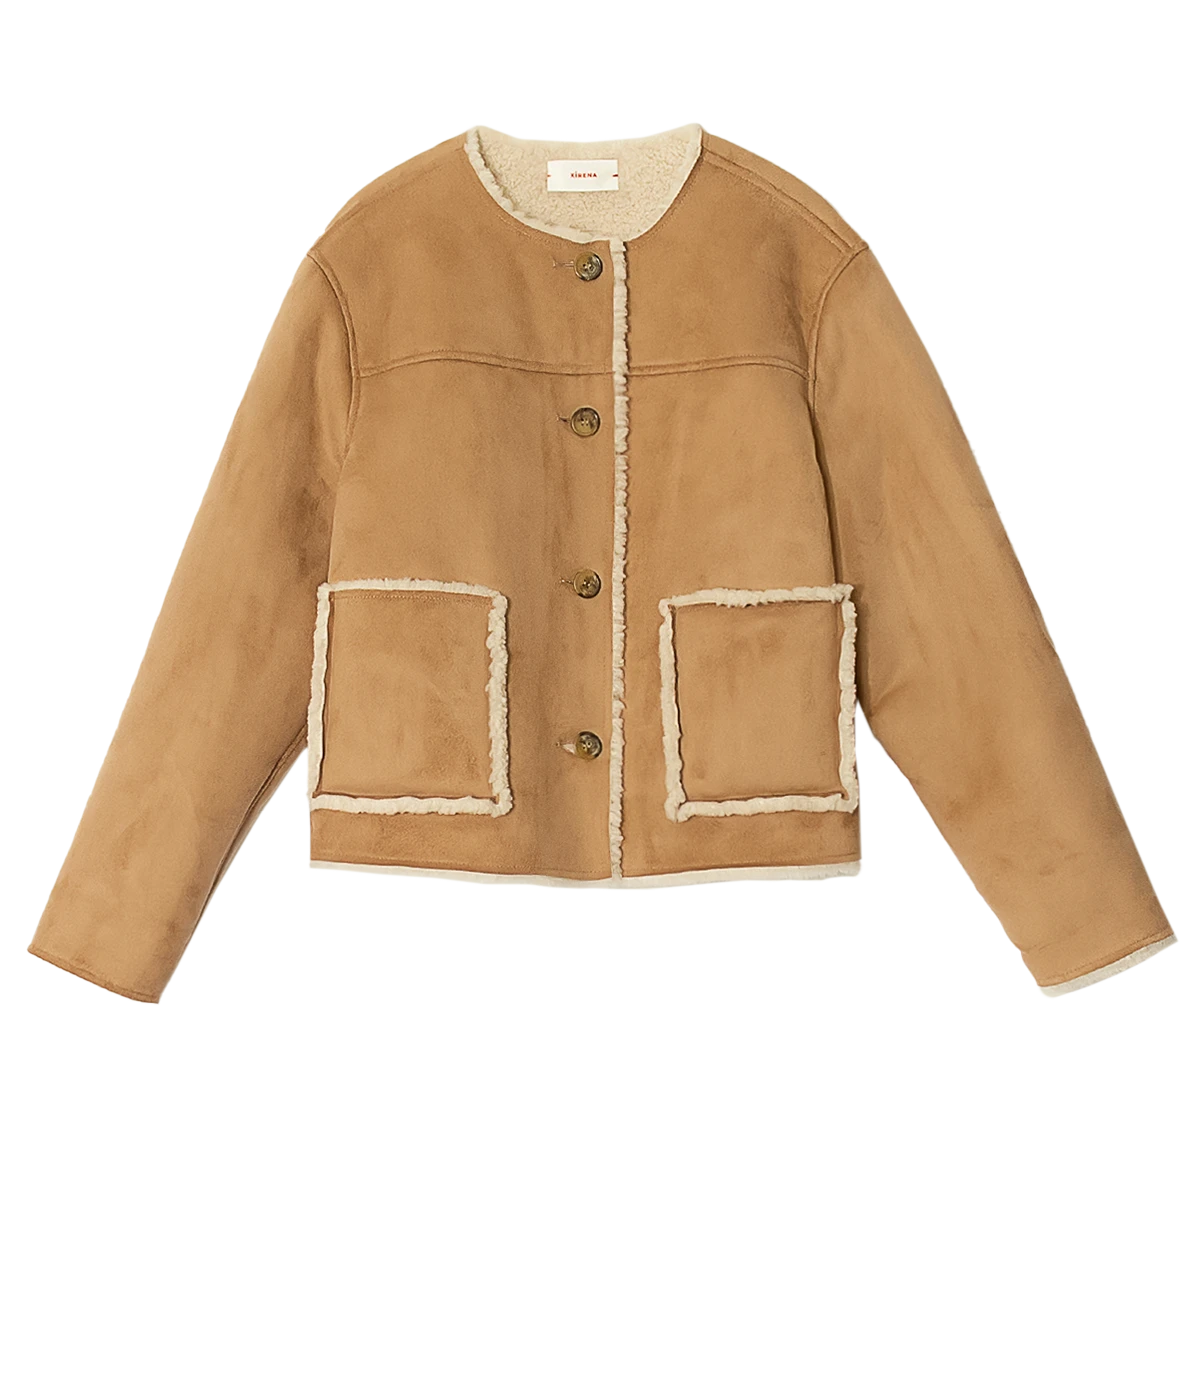 A shearling long sleeve jacket in a camel suede, contrast shearling pocket detailing, button down, winter jacket, bra friendly, made in USA, scoop neckline. 